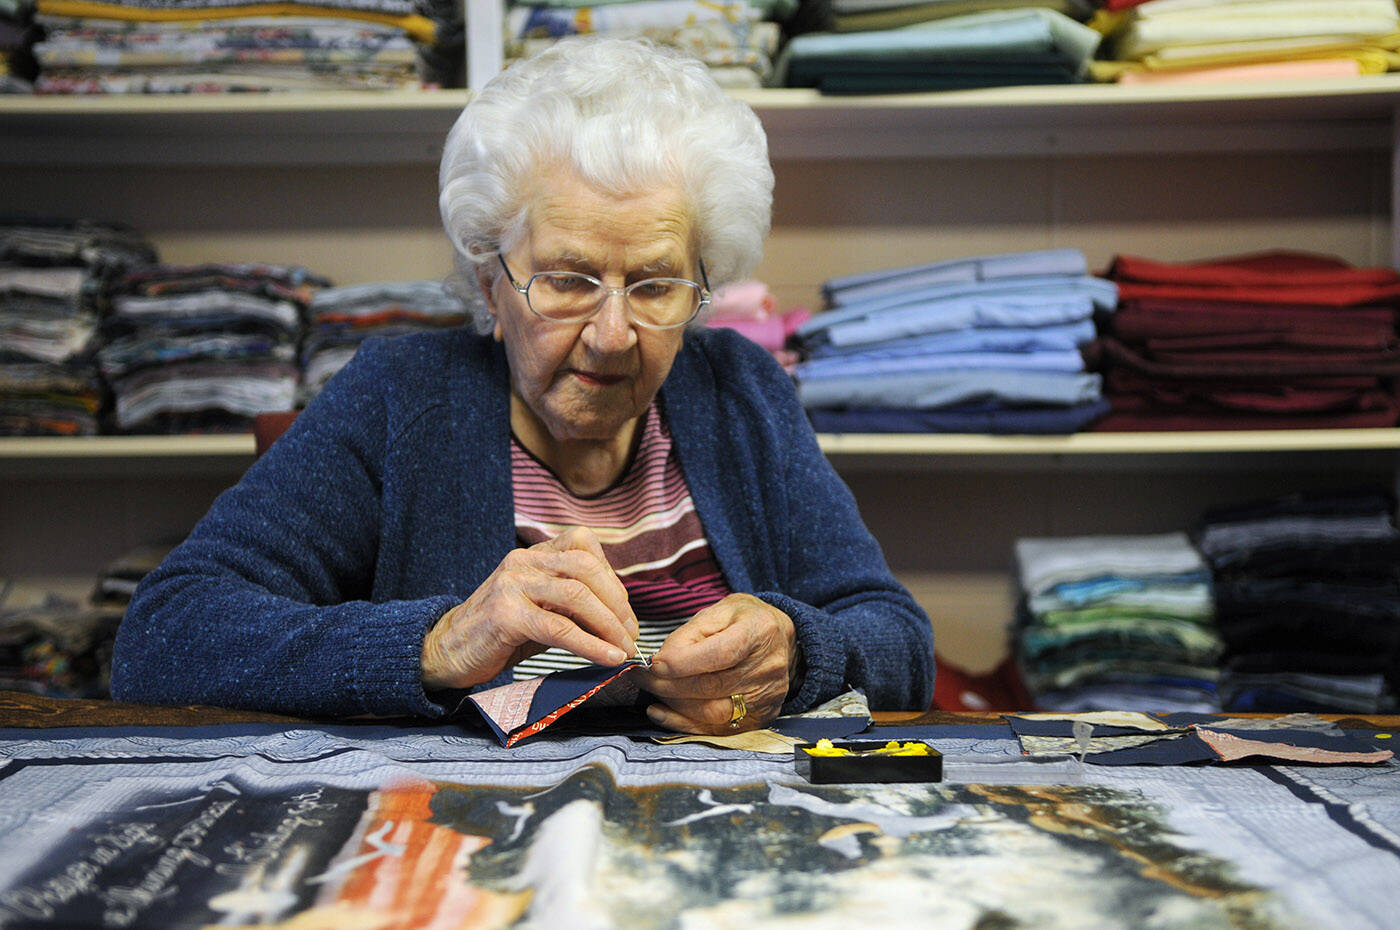 Anne Schaefer has been making quilts for charity for decades and she just recently celebrated her 100th birthday. (Jenna Hauck/ Chilliwack Progress)